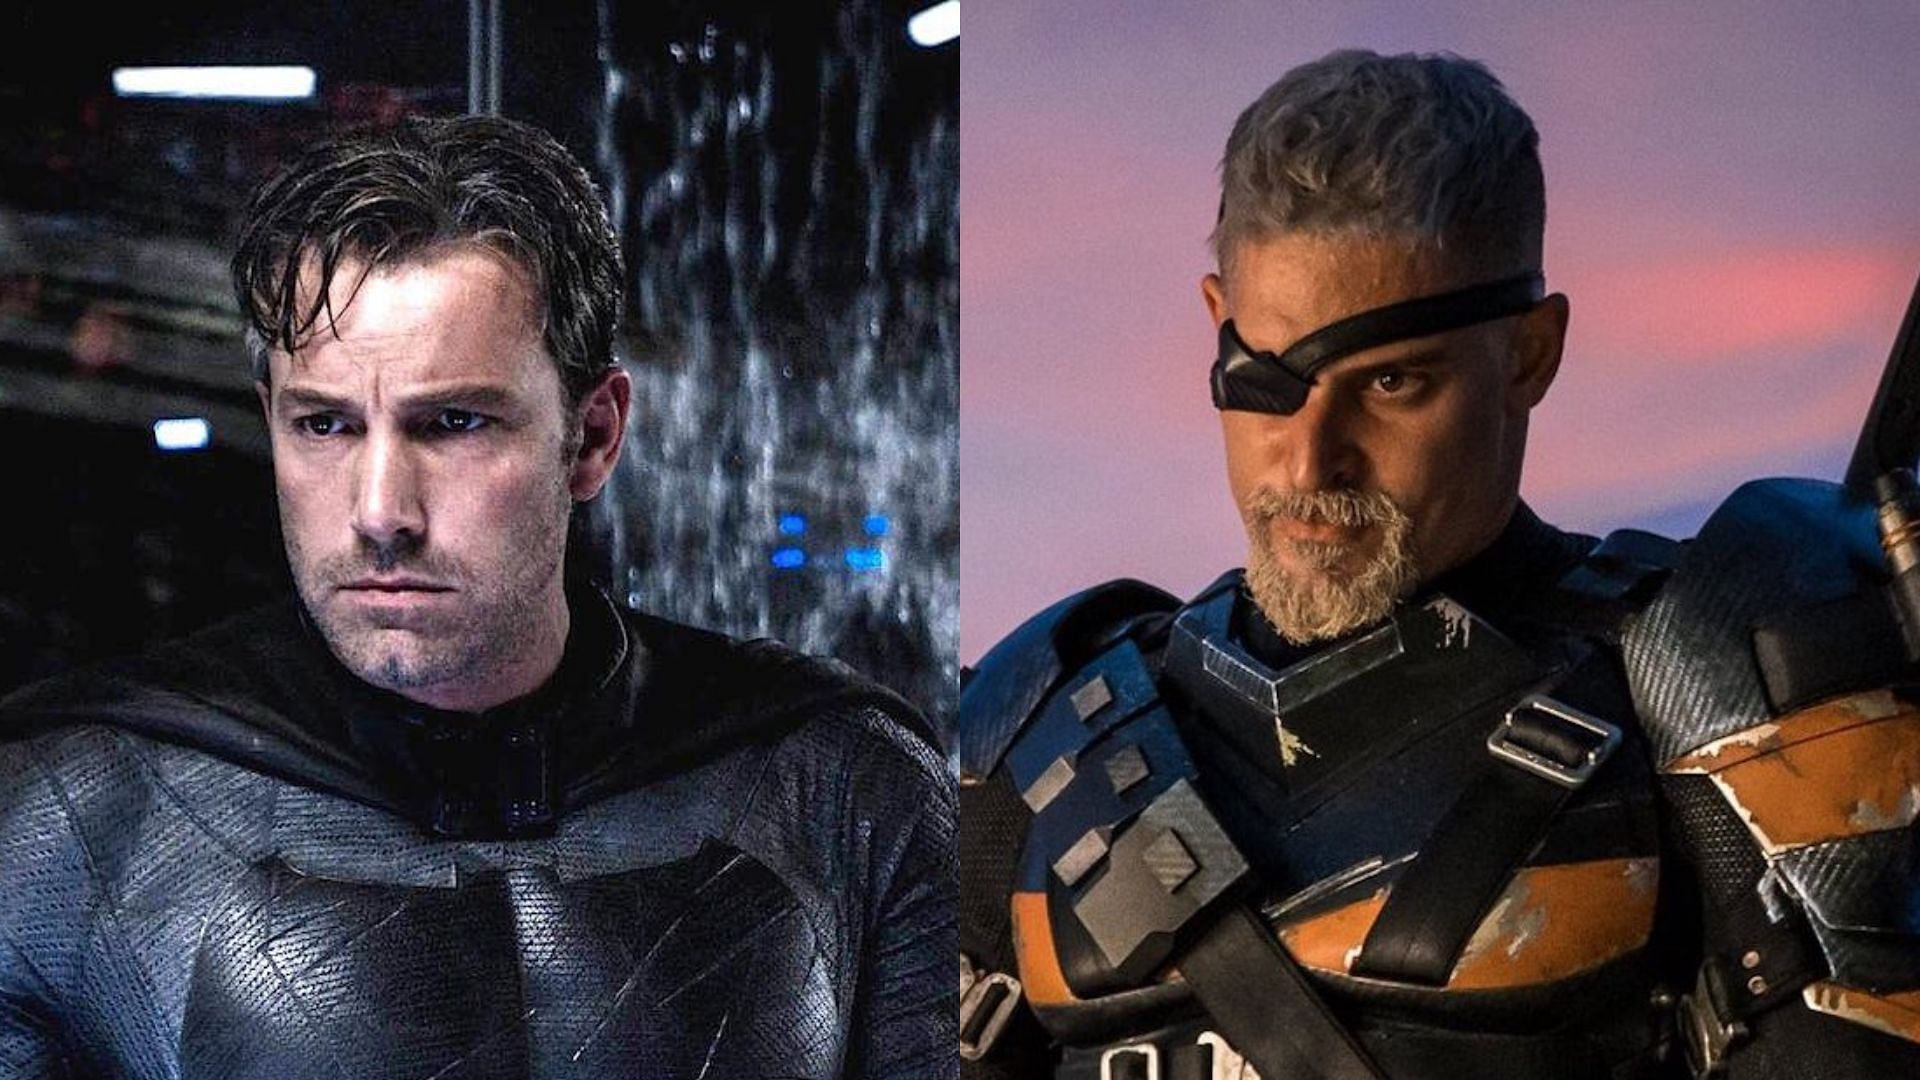 Ben Affleck reveals that he wanted to make Deathstroke interesting in his scrapped Batman film (Images via DC)